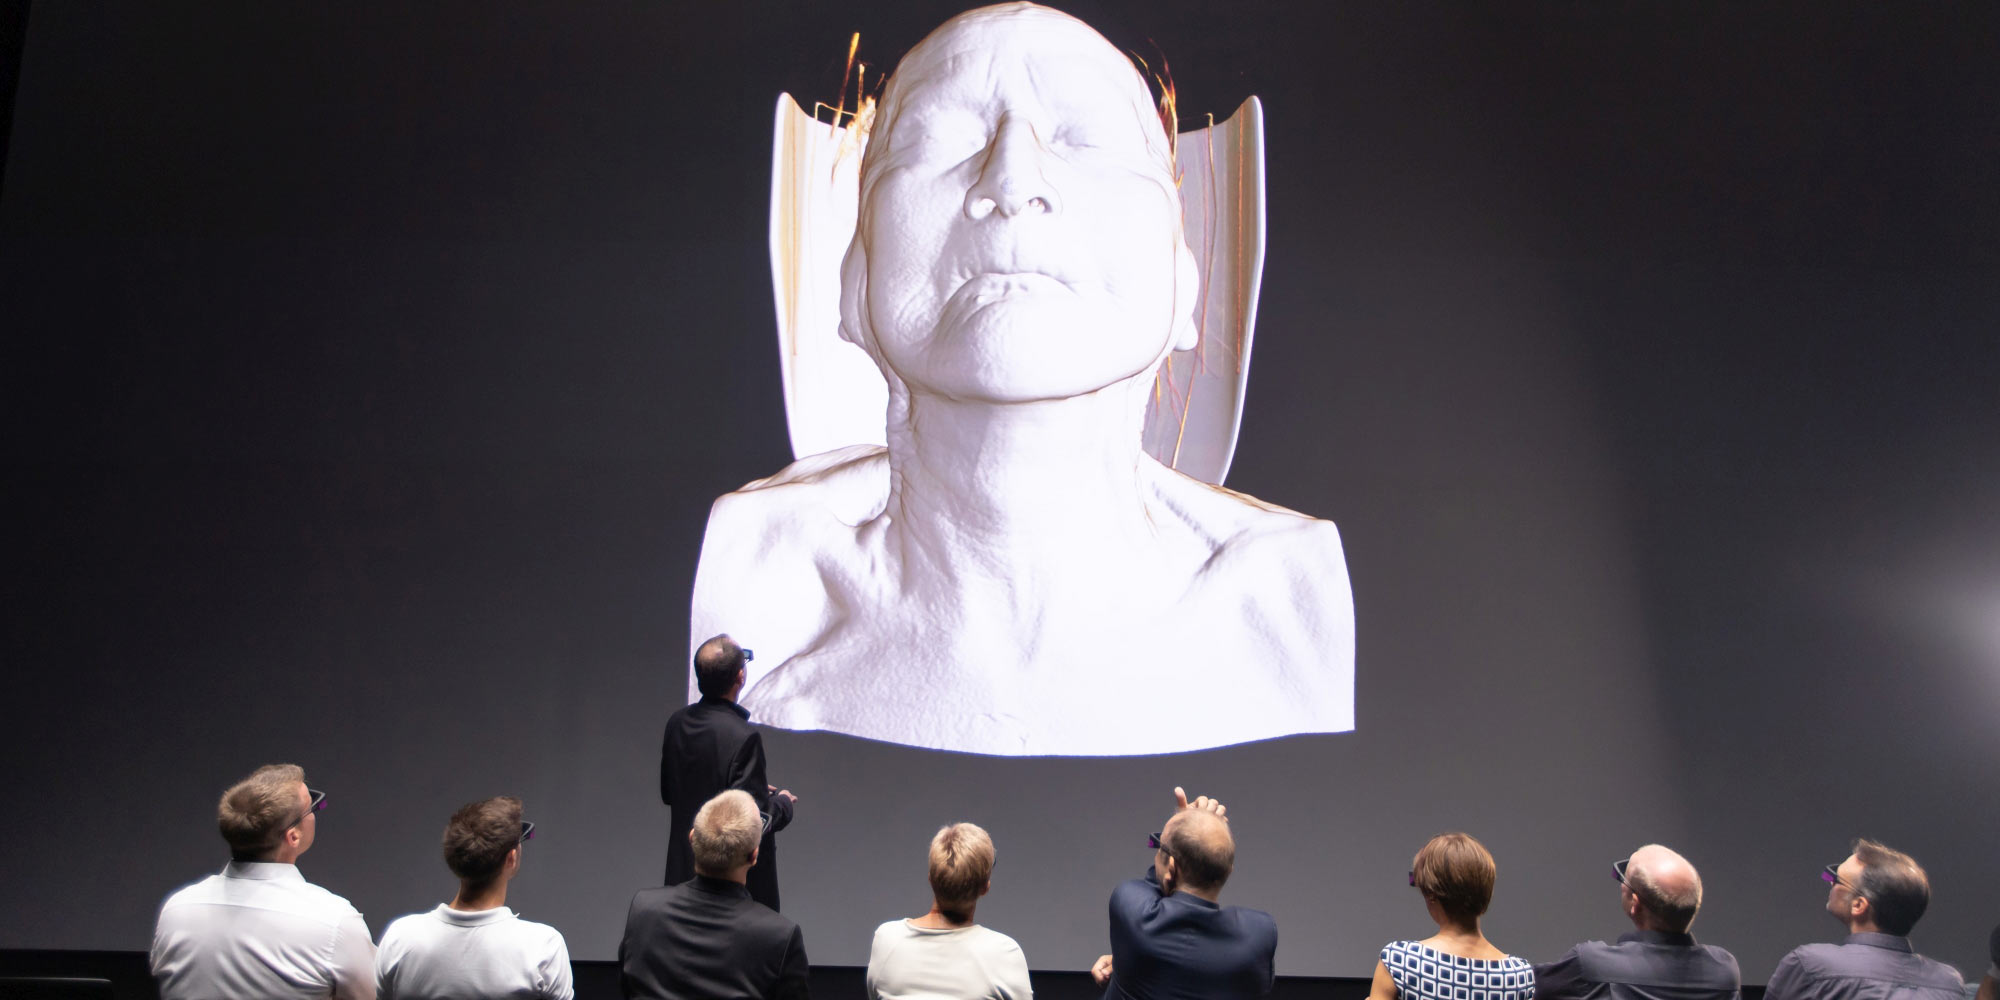 From the outermost layer of skin to the tiniest vessel: "Virtual Anatomy" makes anatomy more tangible and personal than ever before.